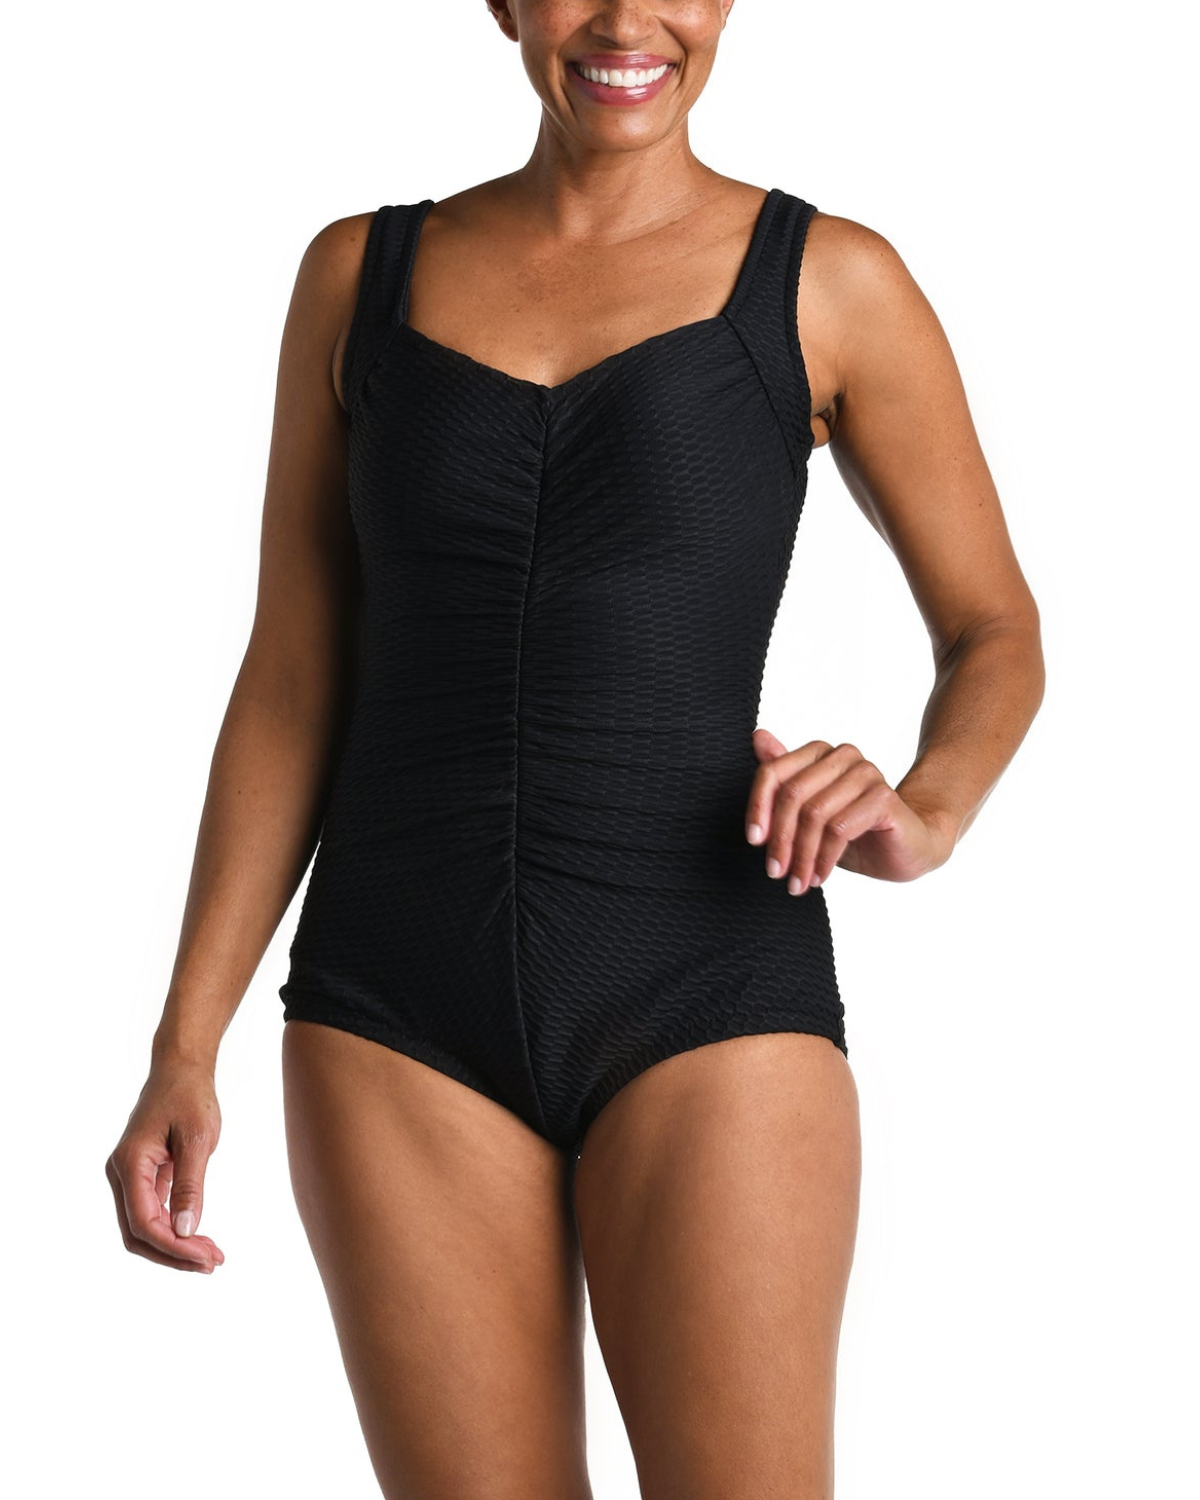 Model wearing a textured one piece swimsuit with a girl leg cut in black